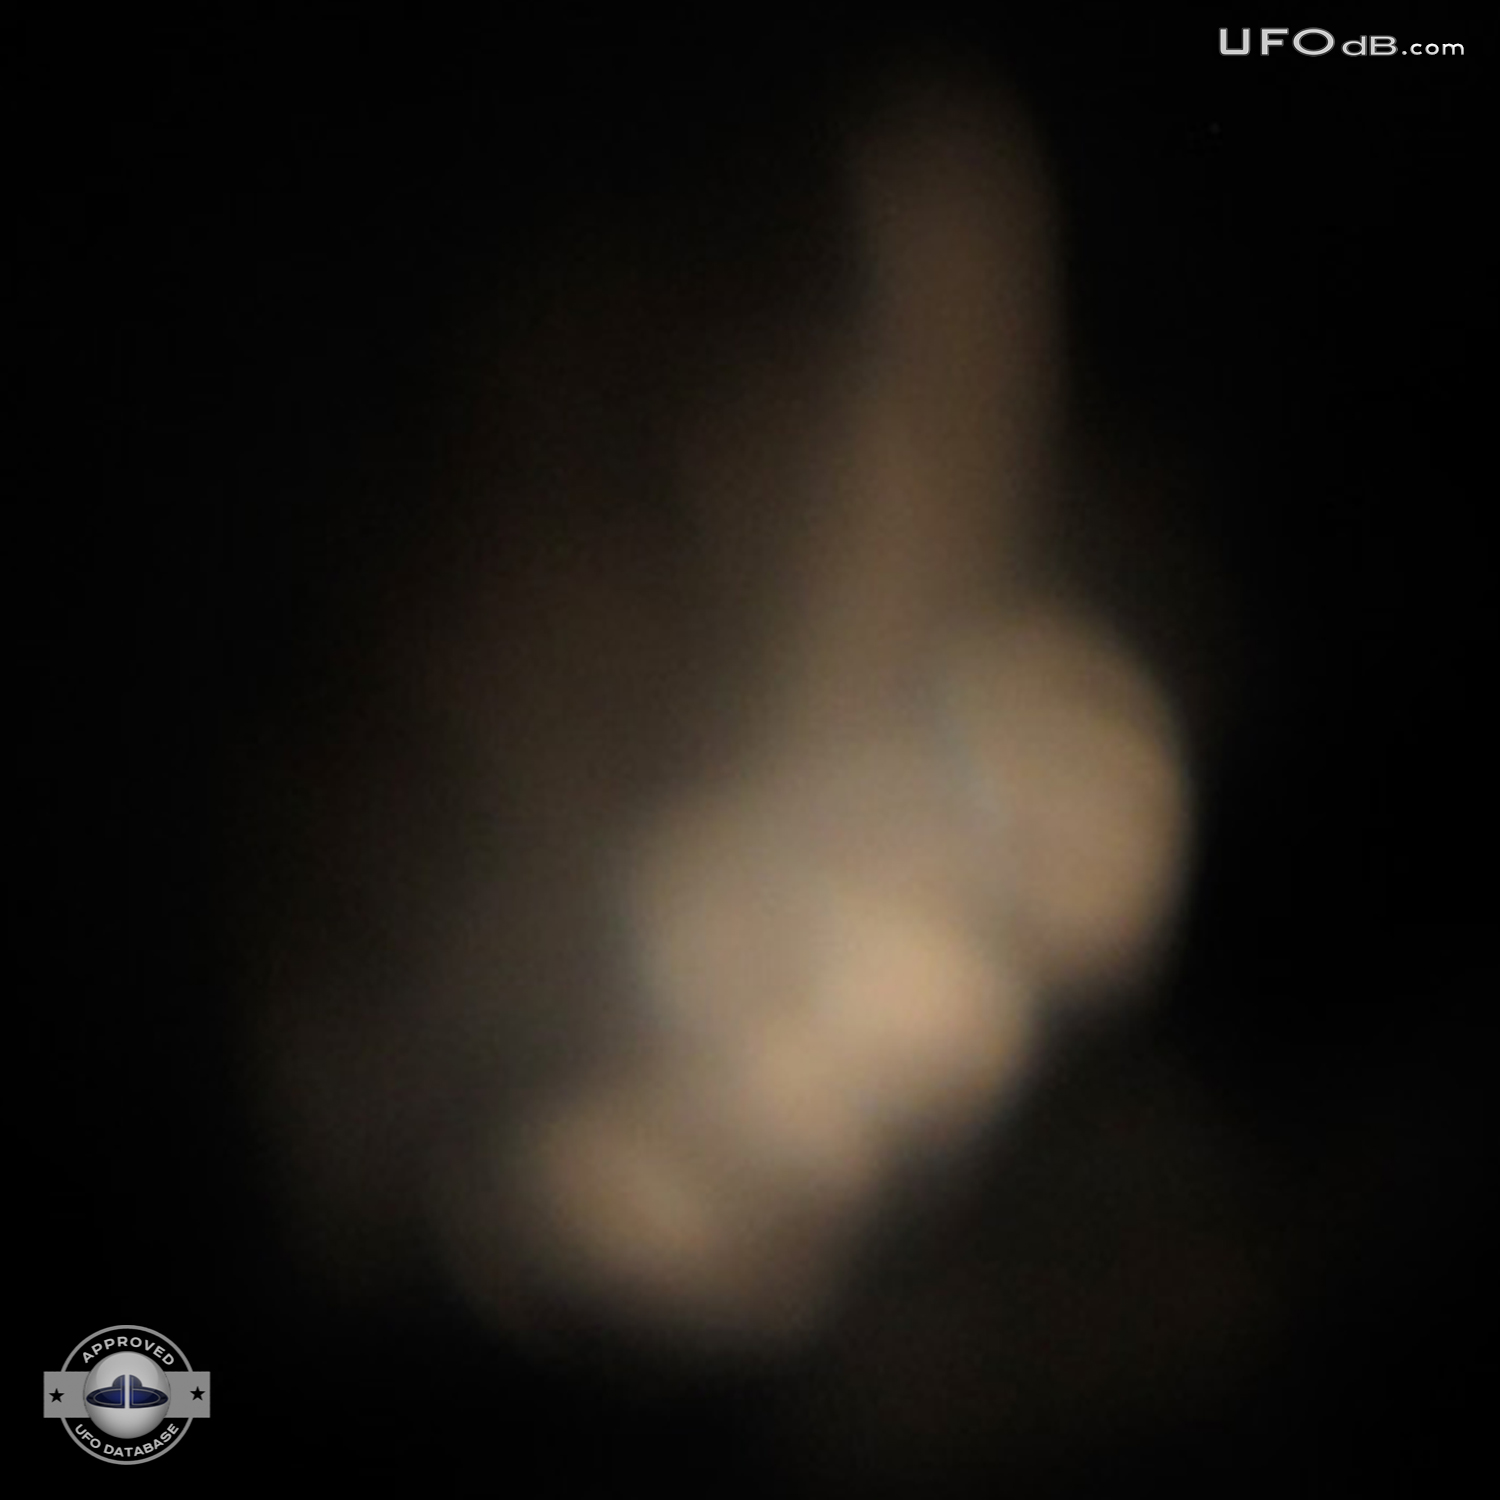 Pine Creek Campers see two UFOs on same night | Colorado | May 8 2011 UFO Picture #294-4